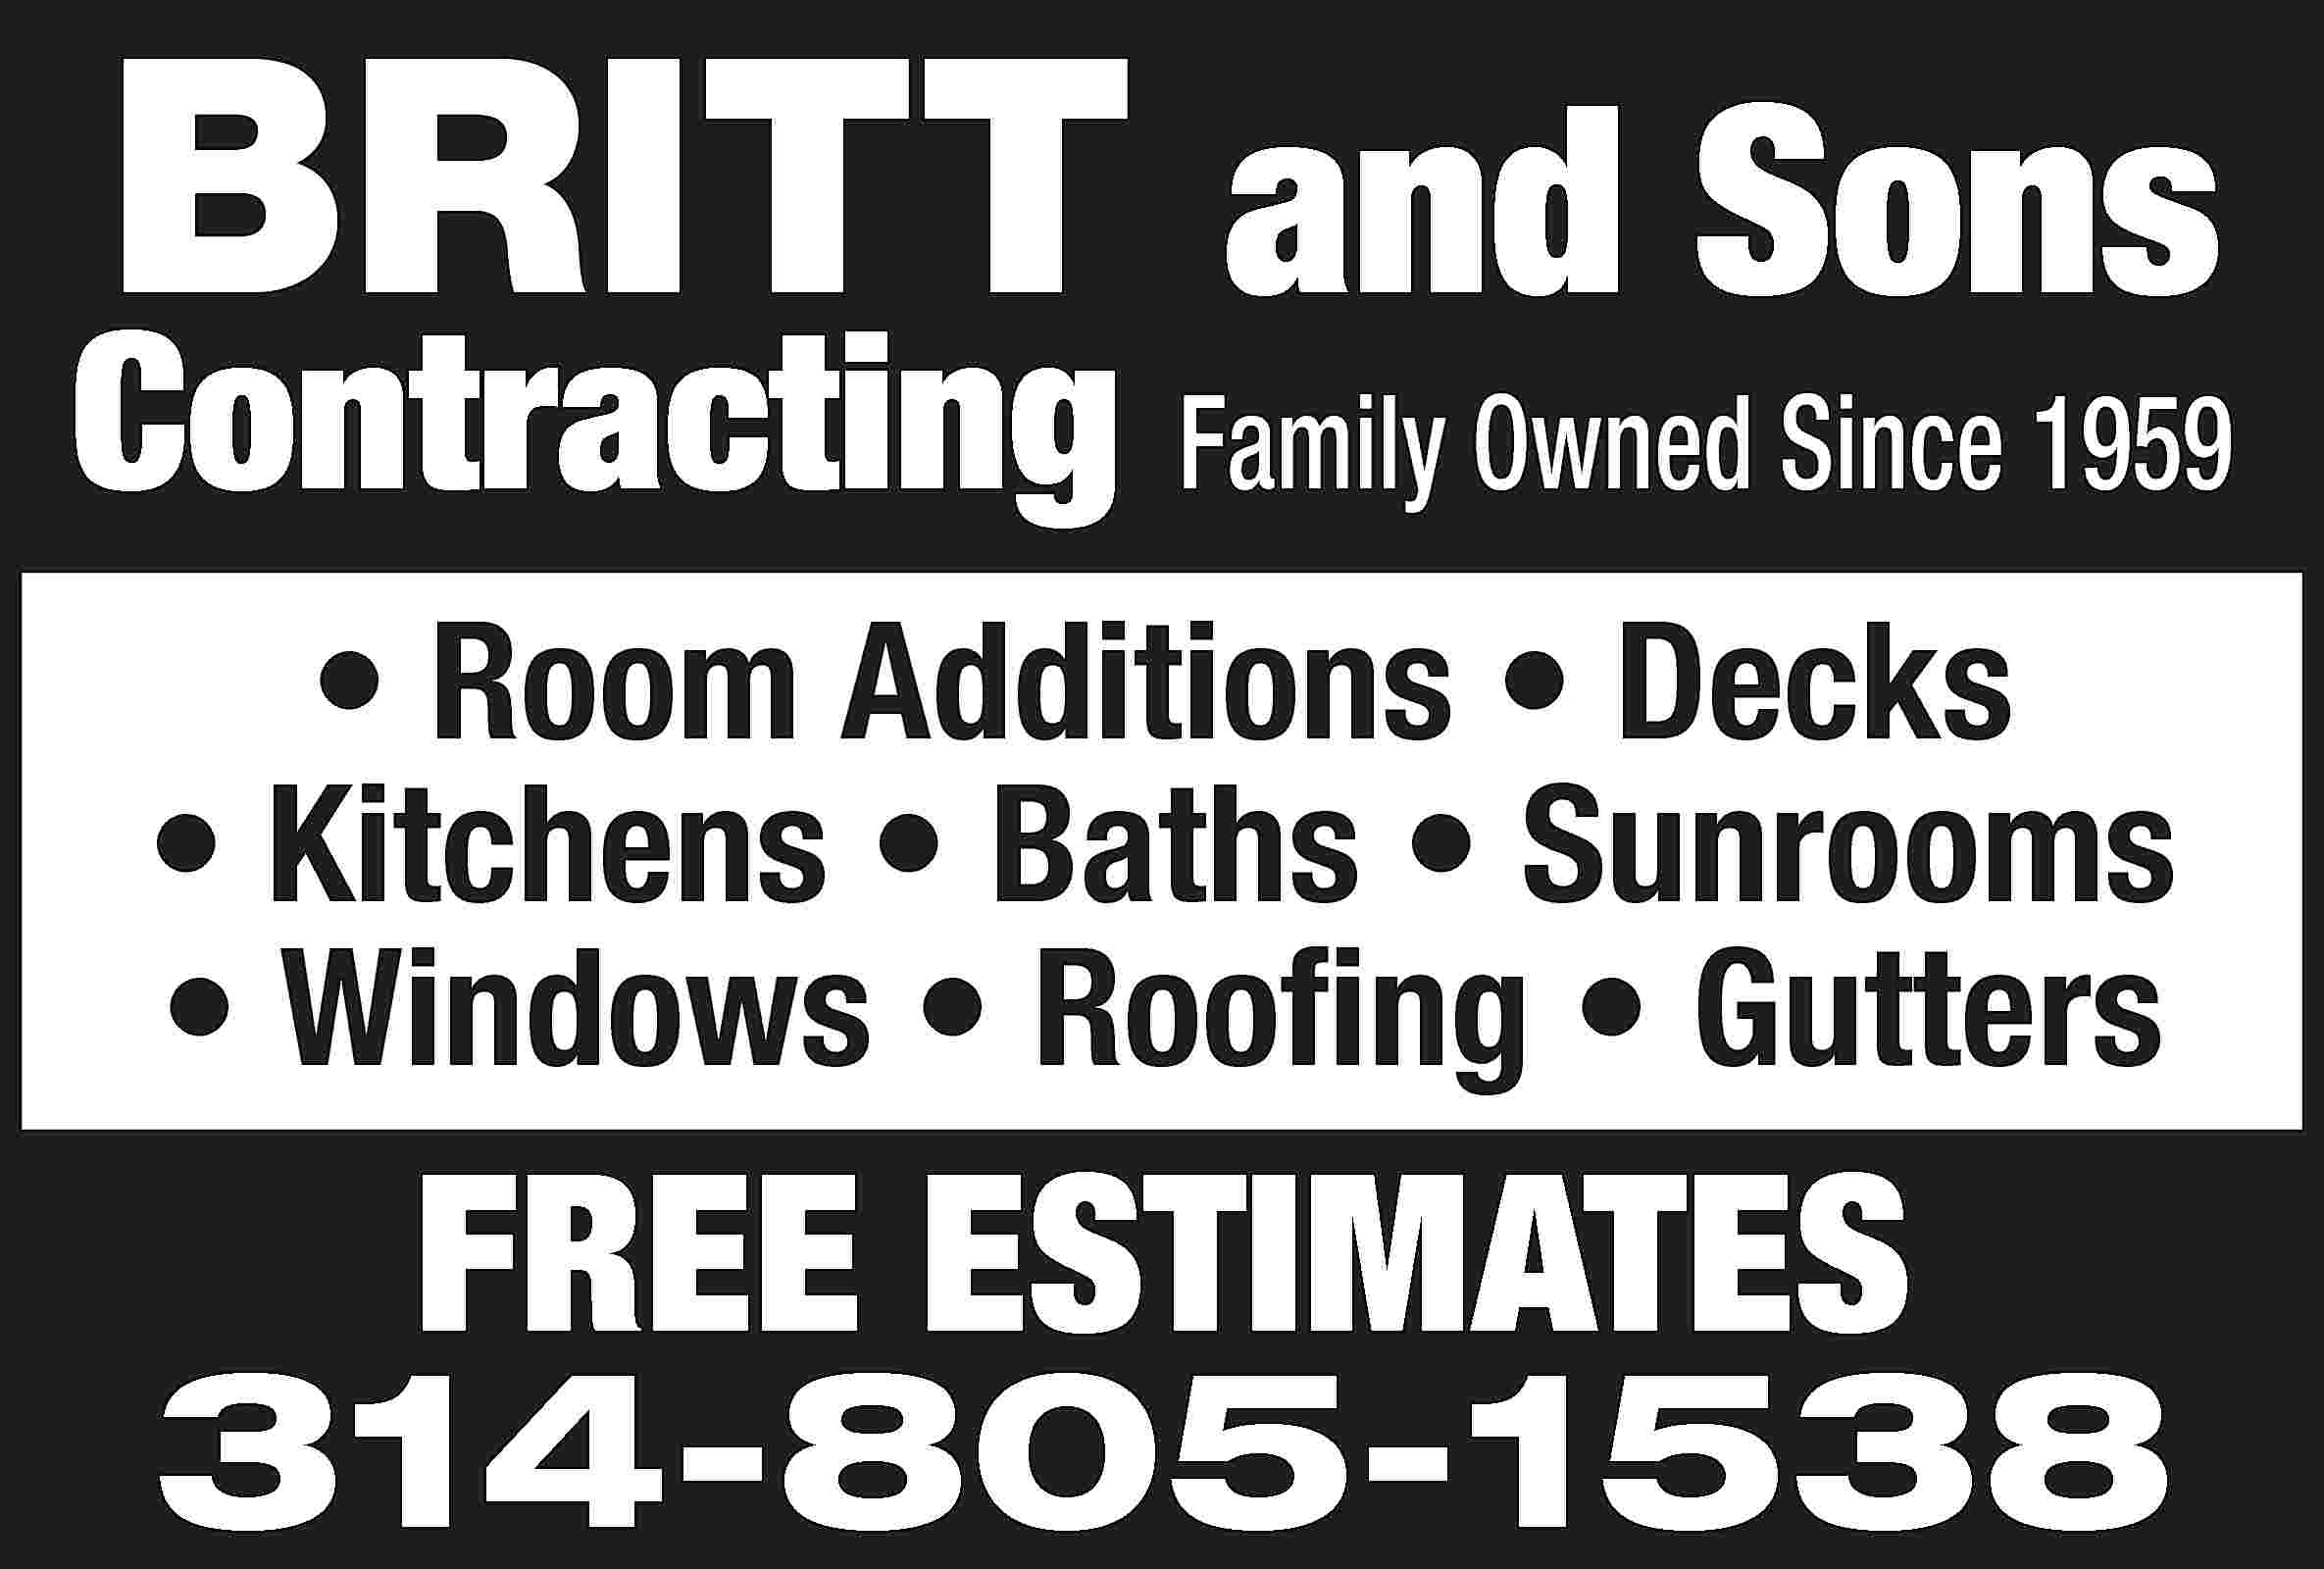 BRITT and Sons Contracting Family  BRITT and Sons Contracting Family Owned Since 1959 • Room Additions • Decks • Kitchens • Baths • Sunrooms • Windows • Roofing • Gutters FREE ESTIMATES 314-805-1538